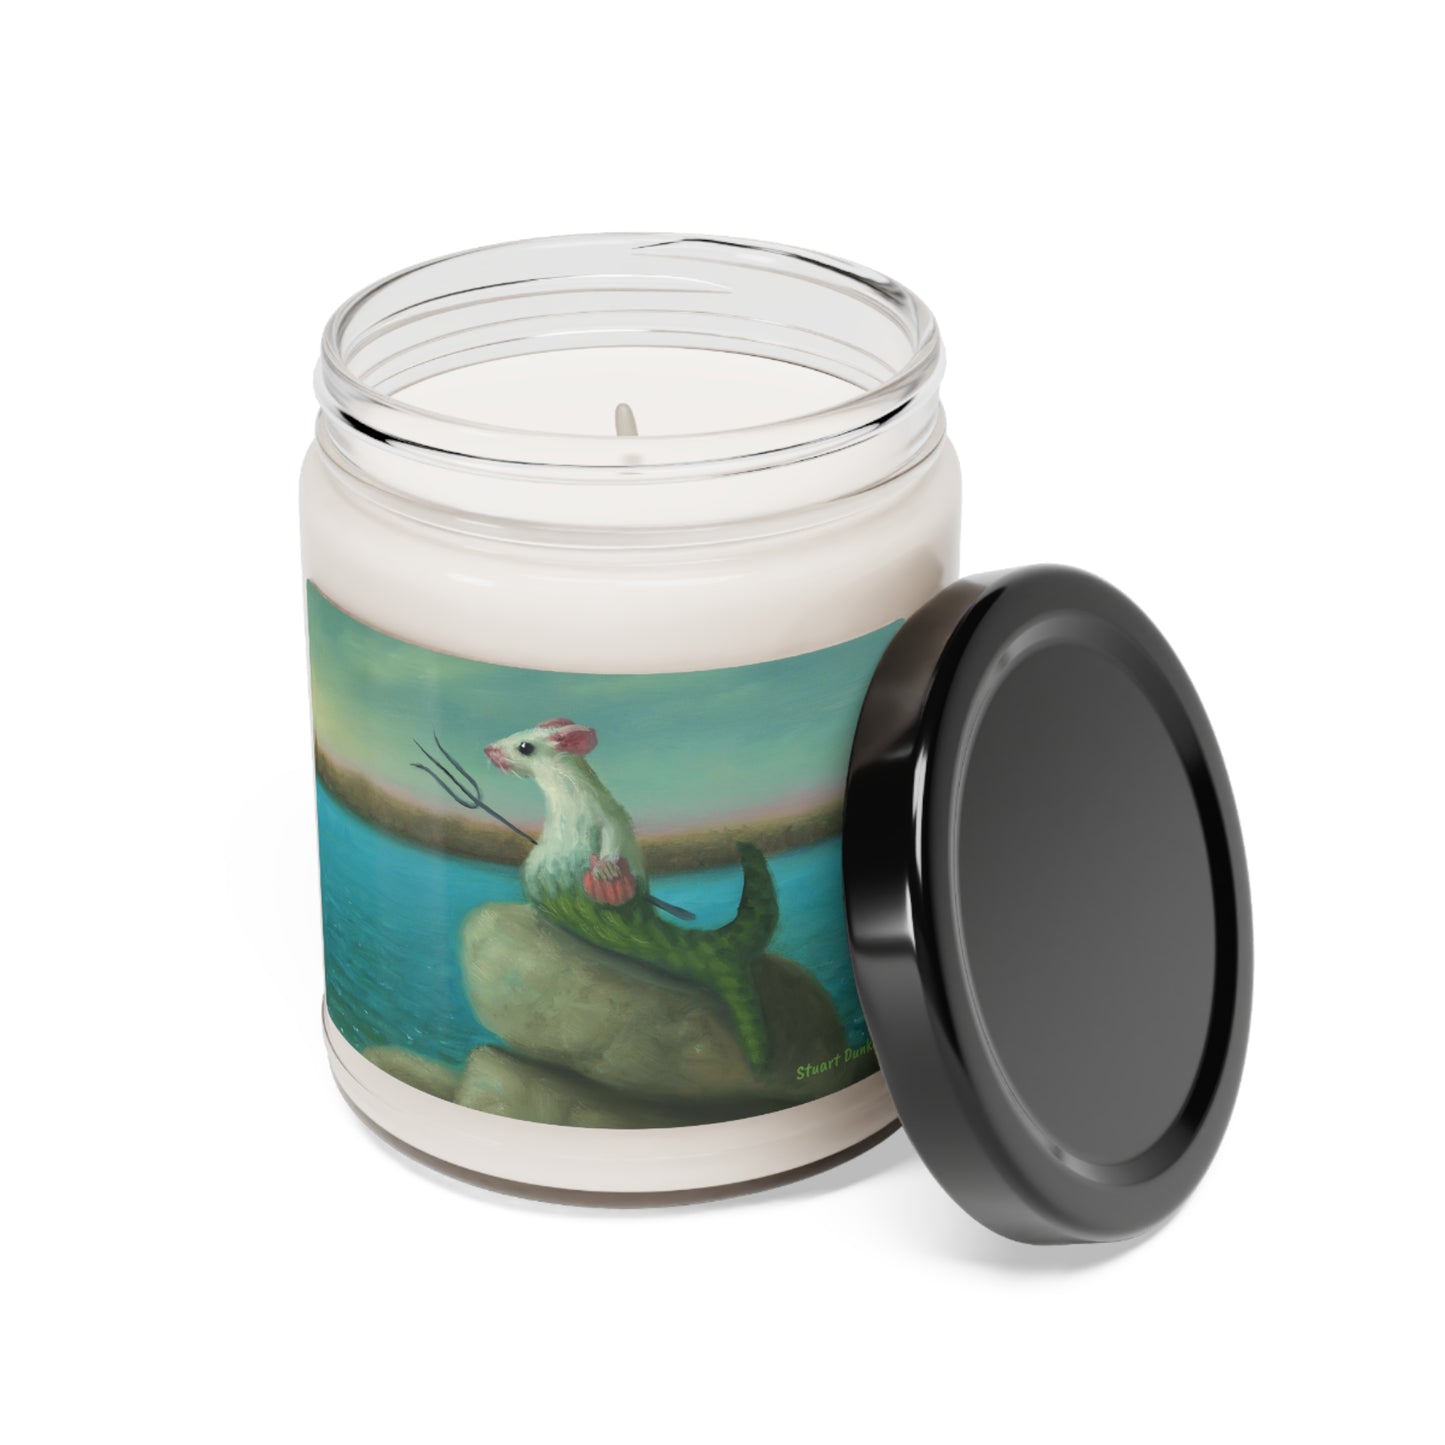 Stuart Dunkel: "Mermouse Warrior" - Scented Soy Candle, 9oz